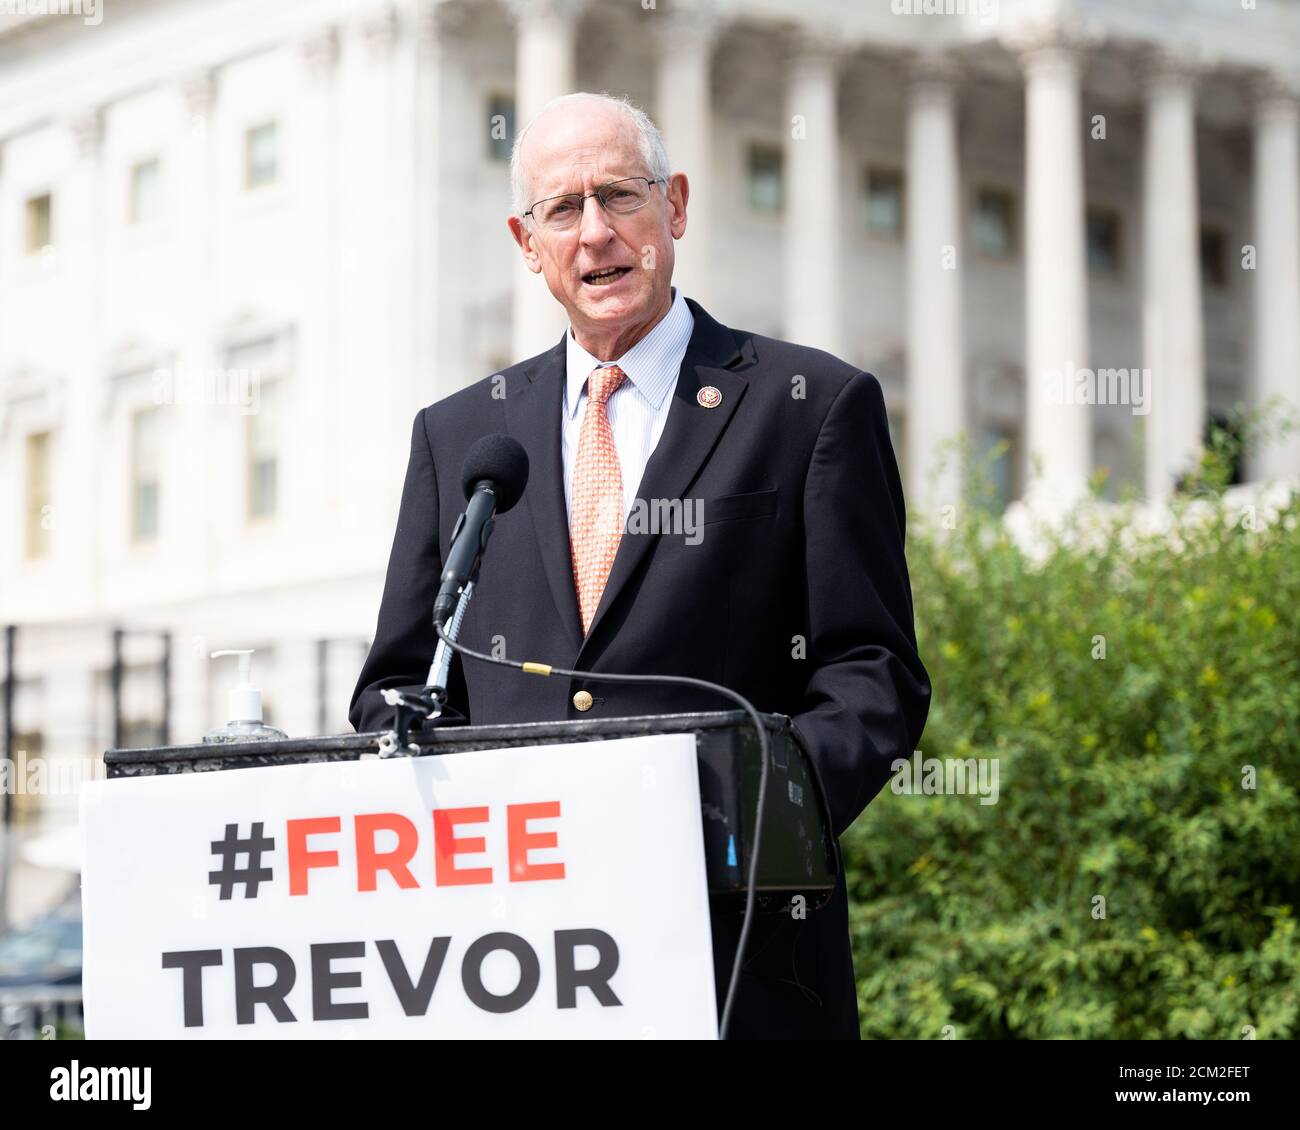 U.S. Representative Mike Conaway (R-TX) speaks at a press conference calling for the release of Trevor Reed from a Russian prison. Stock Photo